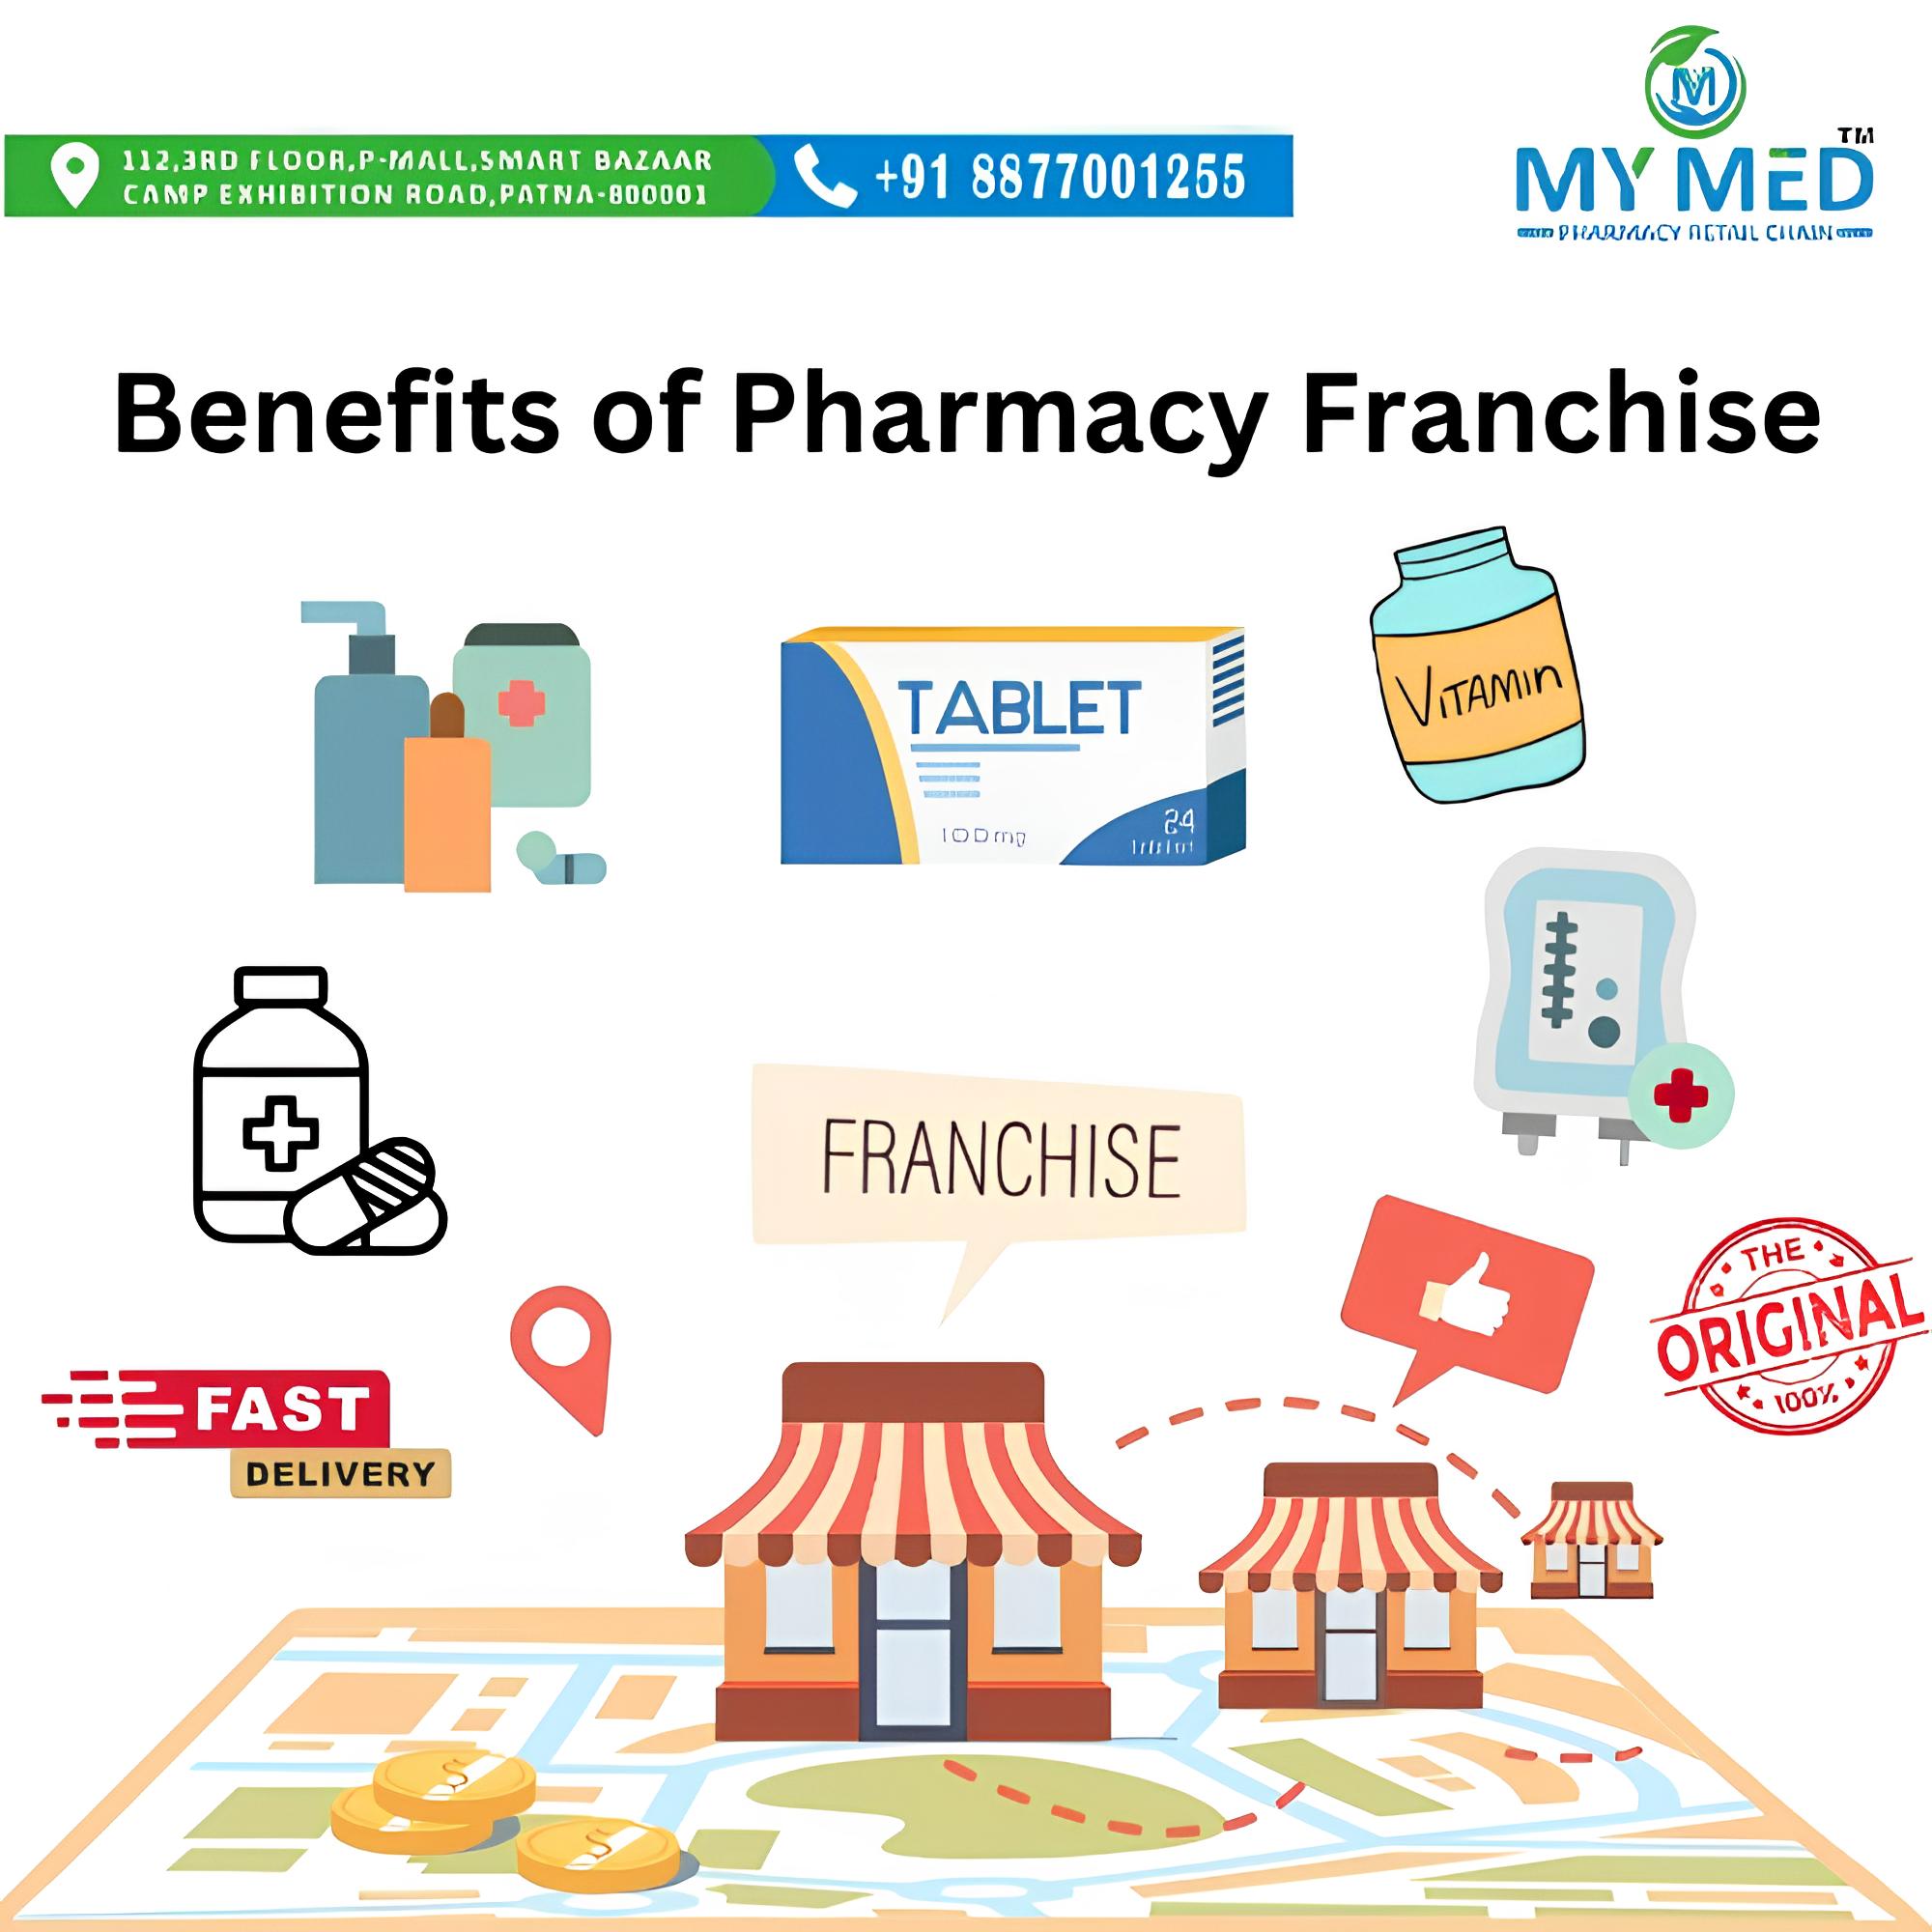 What are the Benefits of Pharmacy Franchise image